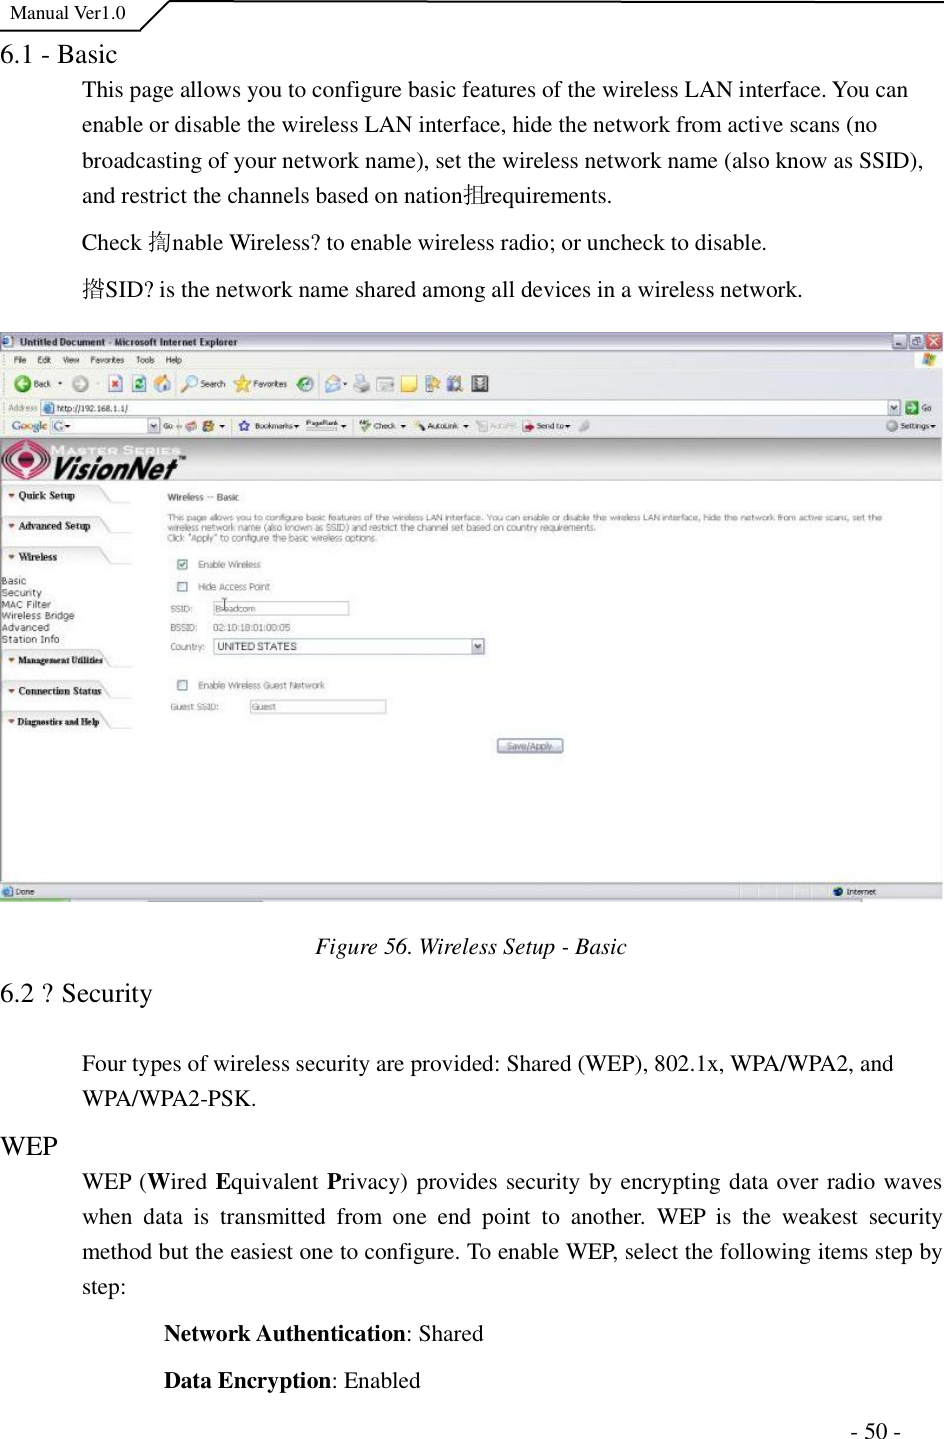  Manual Ver1.0 6.1 - Basic This page allows you to configure basic features of the wireless LAN interface. You can enable or disable the wireless LAN interface, hide the network from active scans (no broadcasting of your network name), set the wireless network name (also know as SSID), and restrict the channels based on nation抯 requirements. Check 揈nable Wireless?to enable wireless radio; or uncheck to disable. 揝SID?is the network name shared among all devices in a wireless network. Figure 56. Wireless Setup - Basic6.2 ?Security Four types of wireless security are provided: Shared (WEP), 802.1x, WPA/WPA2, and WPA/WPA2-PSK.  WEP  WEP (Wired Equivalent Privacy) provides security by encrypting data over radio waves when data is transmitted from one end point to another. WEP is the weakest security method but the easiest one to configure. To enable WEP, select the following items step by step:Network Authentication: Shared Data Encryption: Enabled                                                                      - 50 - 